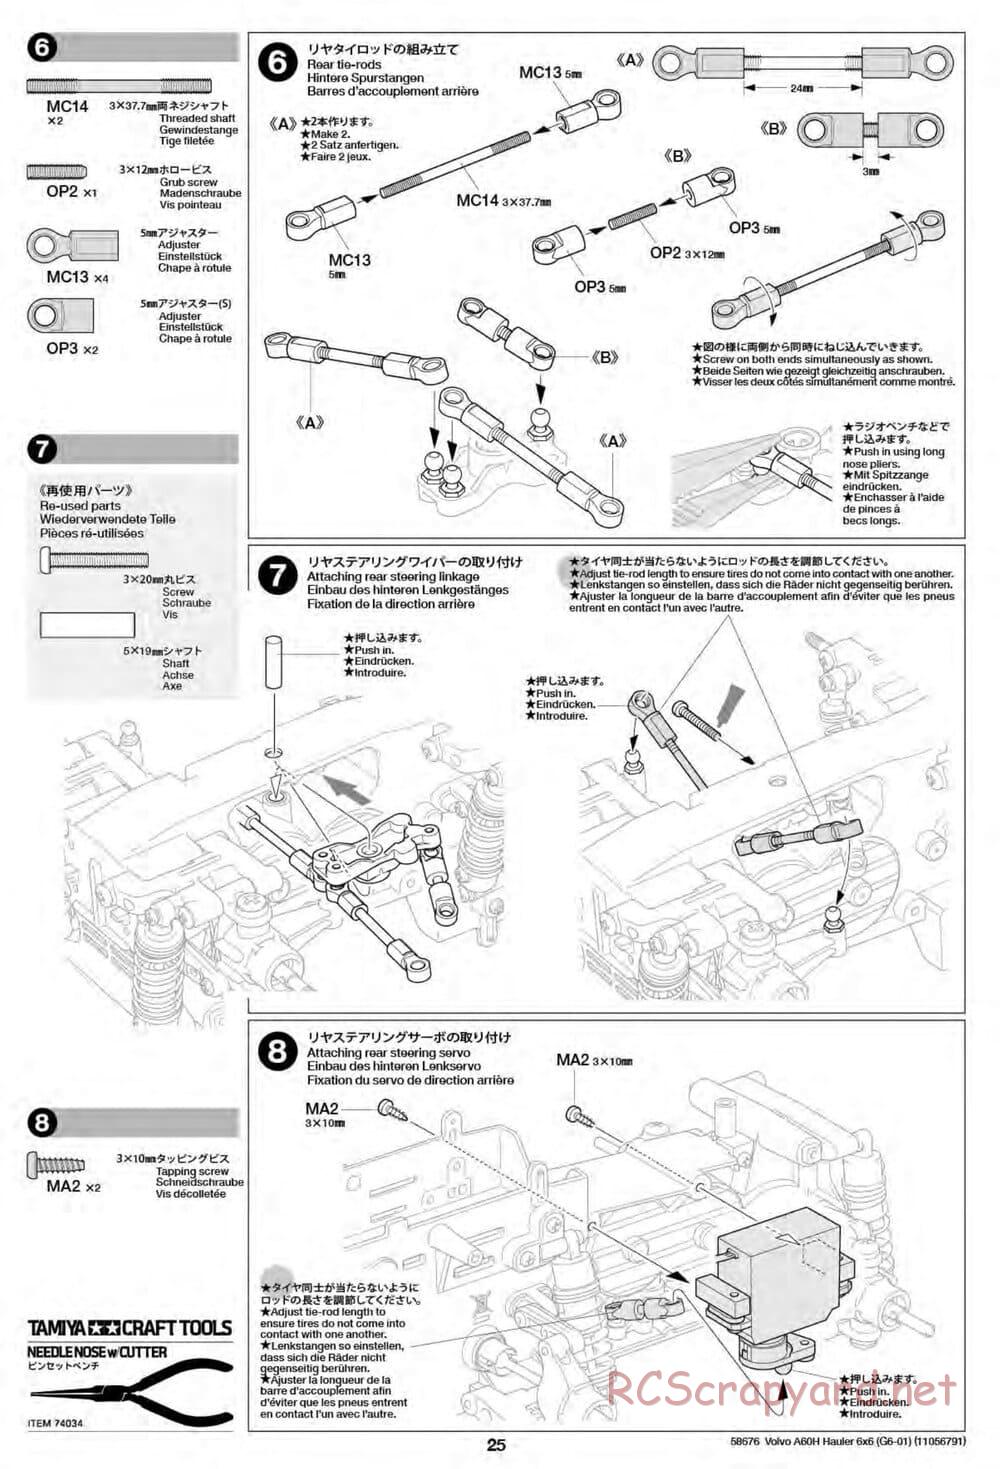 Tamiya - Volvo A60H Dump Truck 6x6 - G6-01 Chassis - Manual - Page 24